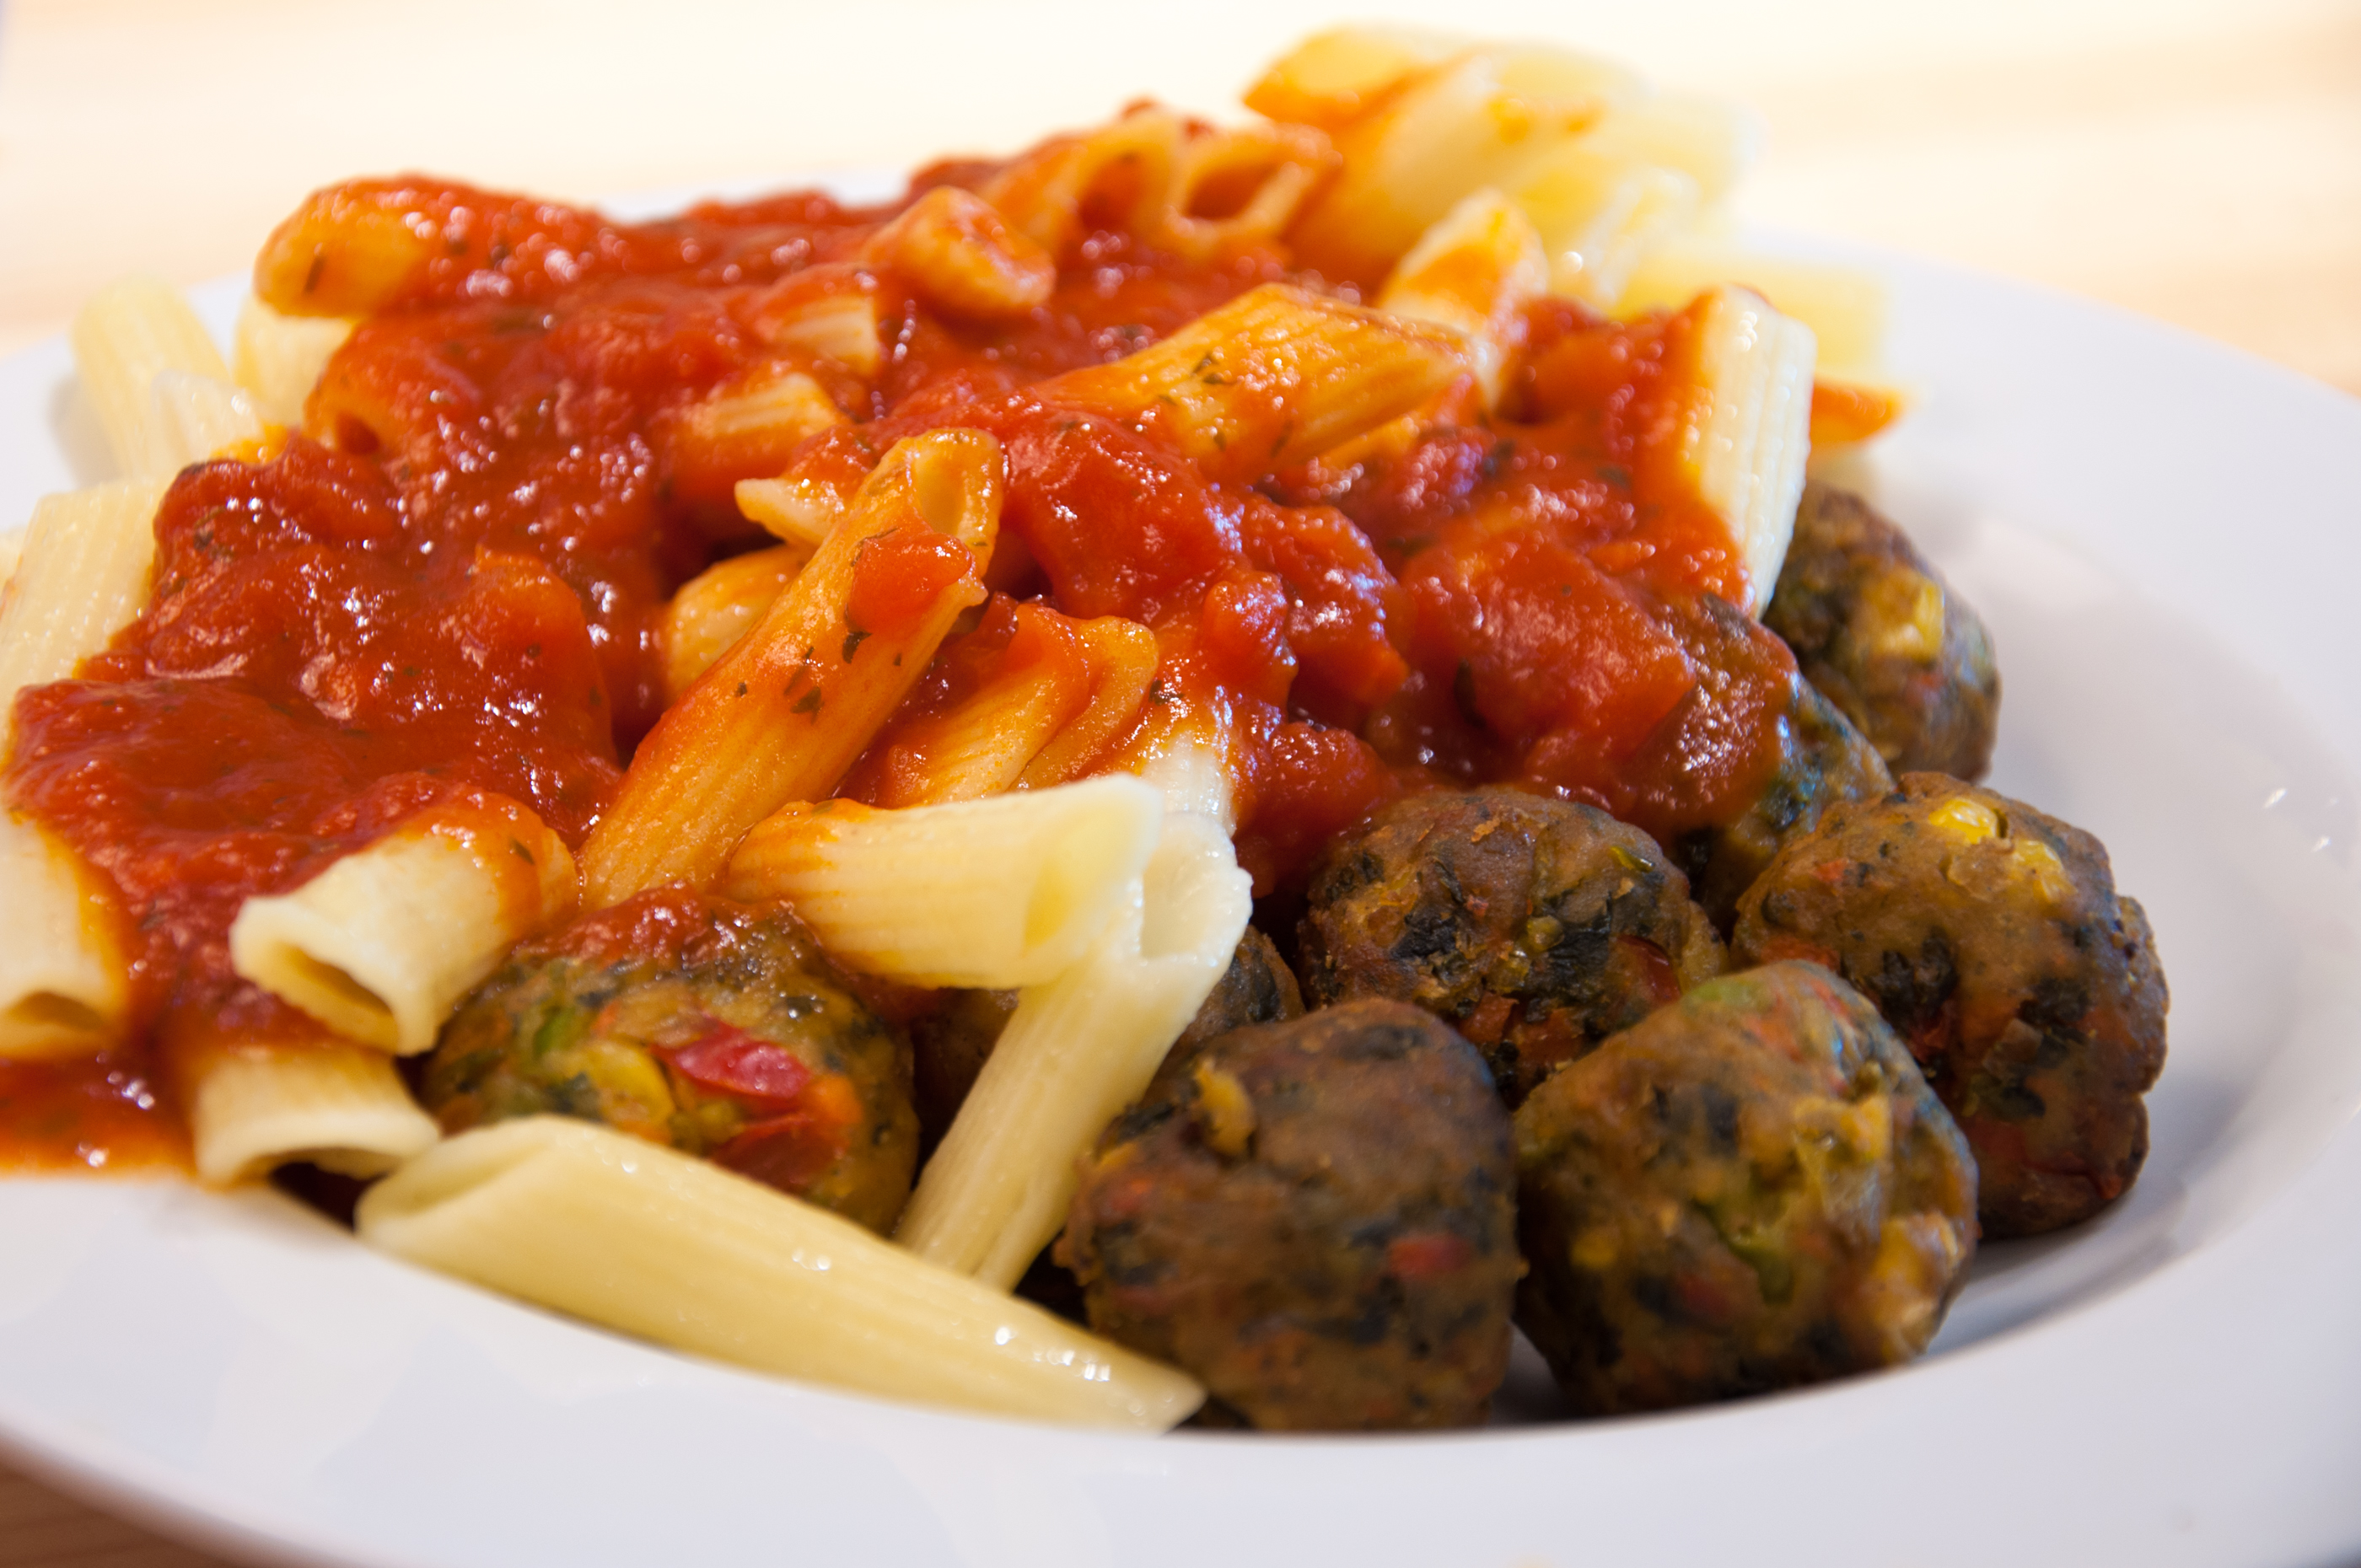 Pasta with meatballs and tomato sauce photo